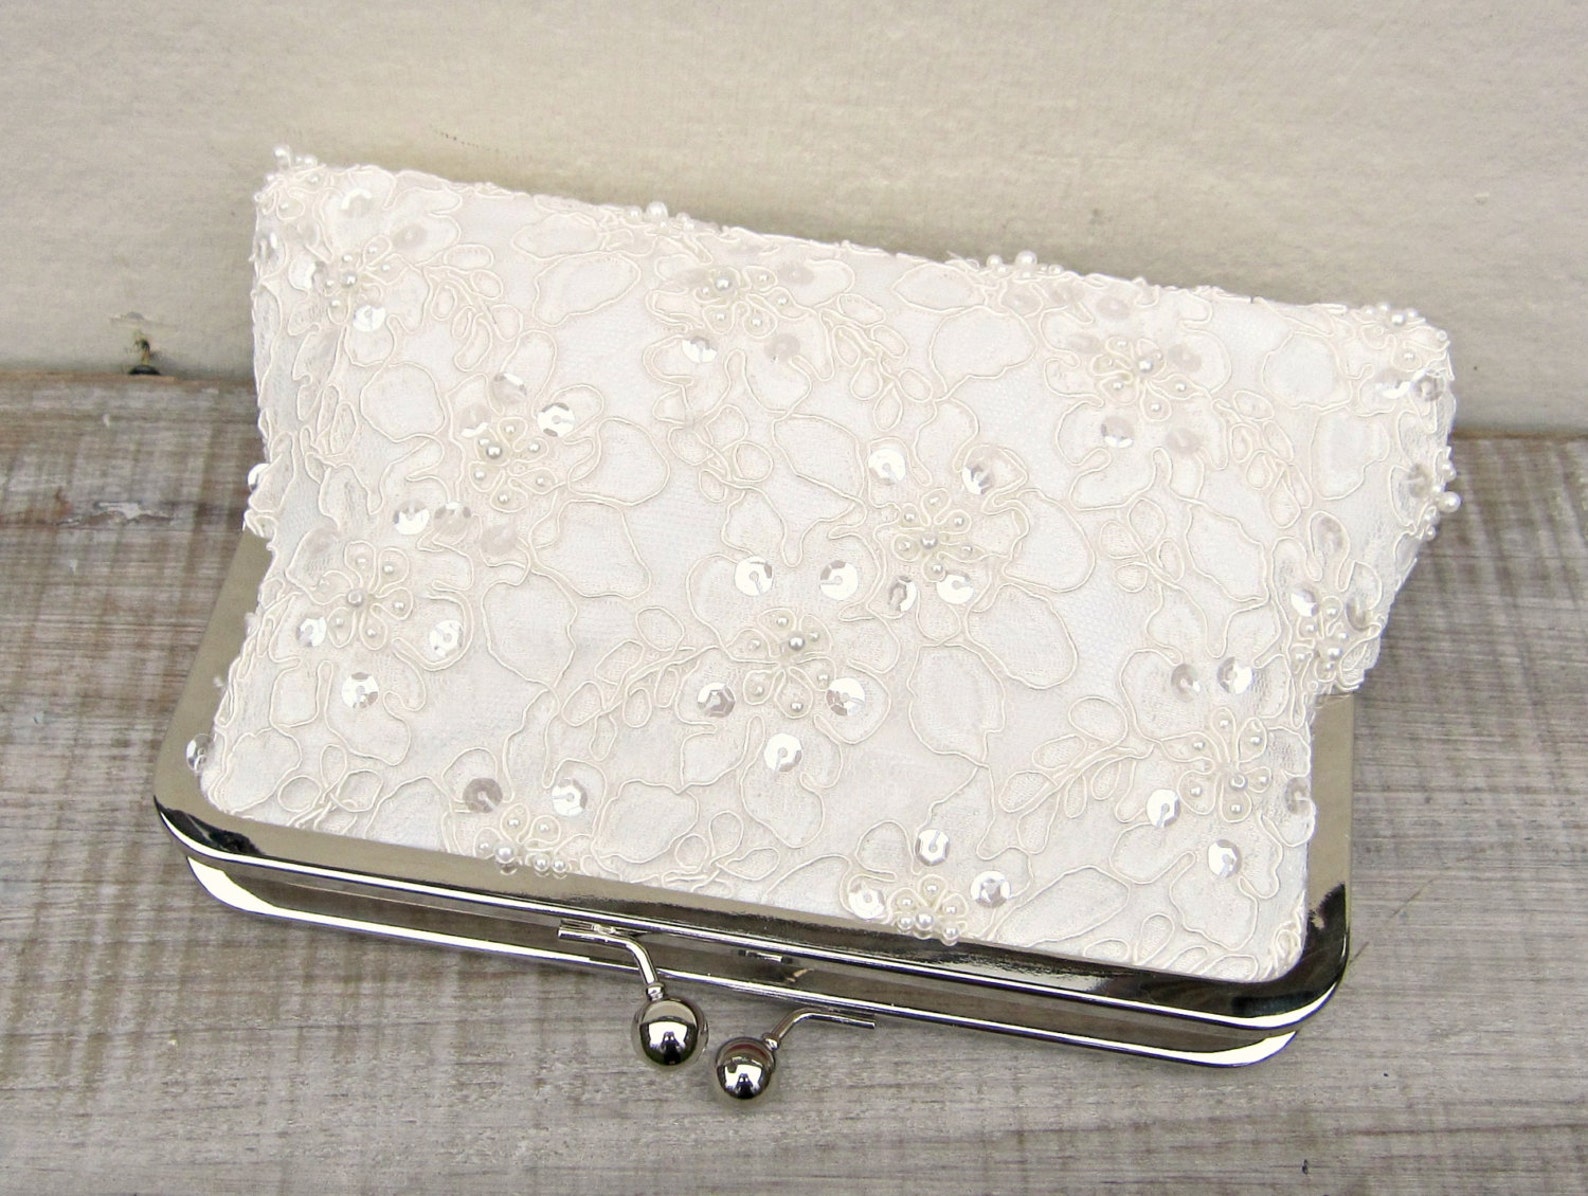 Lace Bridal Clutch Bag Ivory Pearl and Sequin Wedding Clutch - Etsy UK